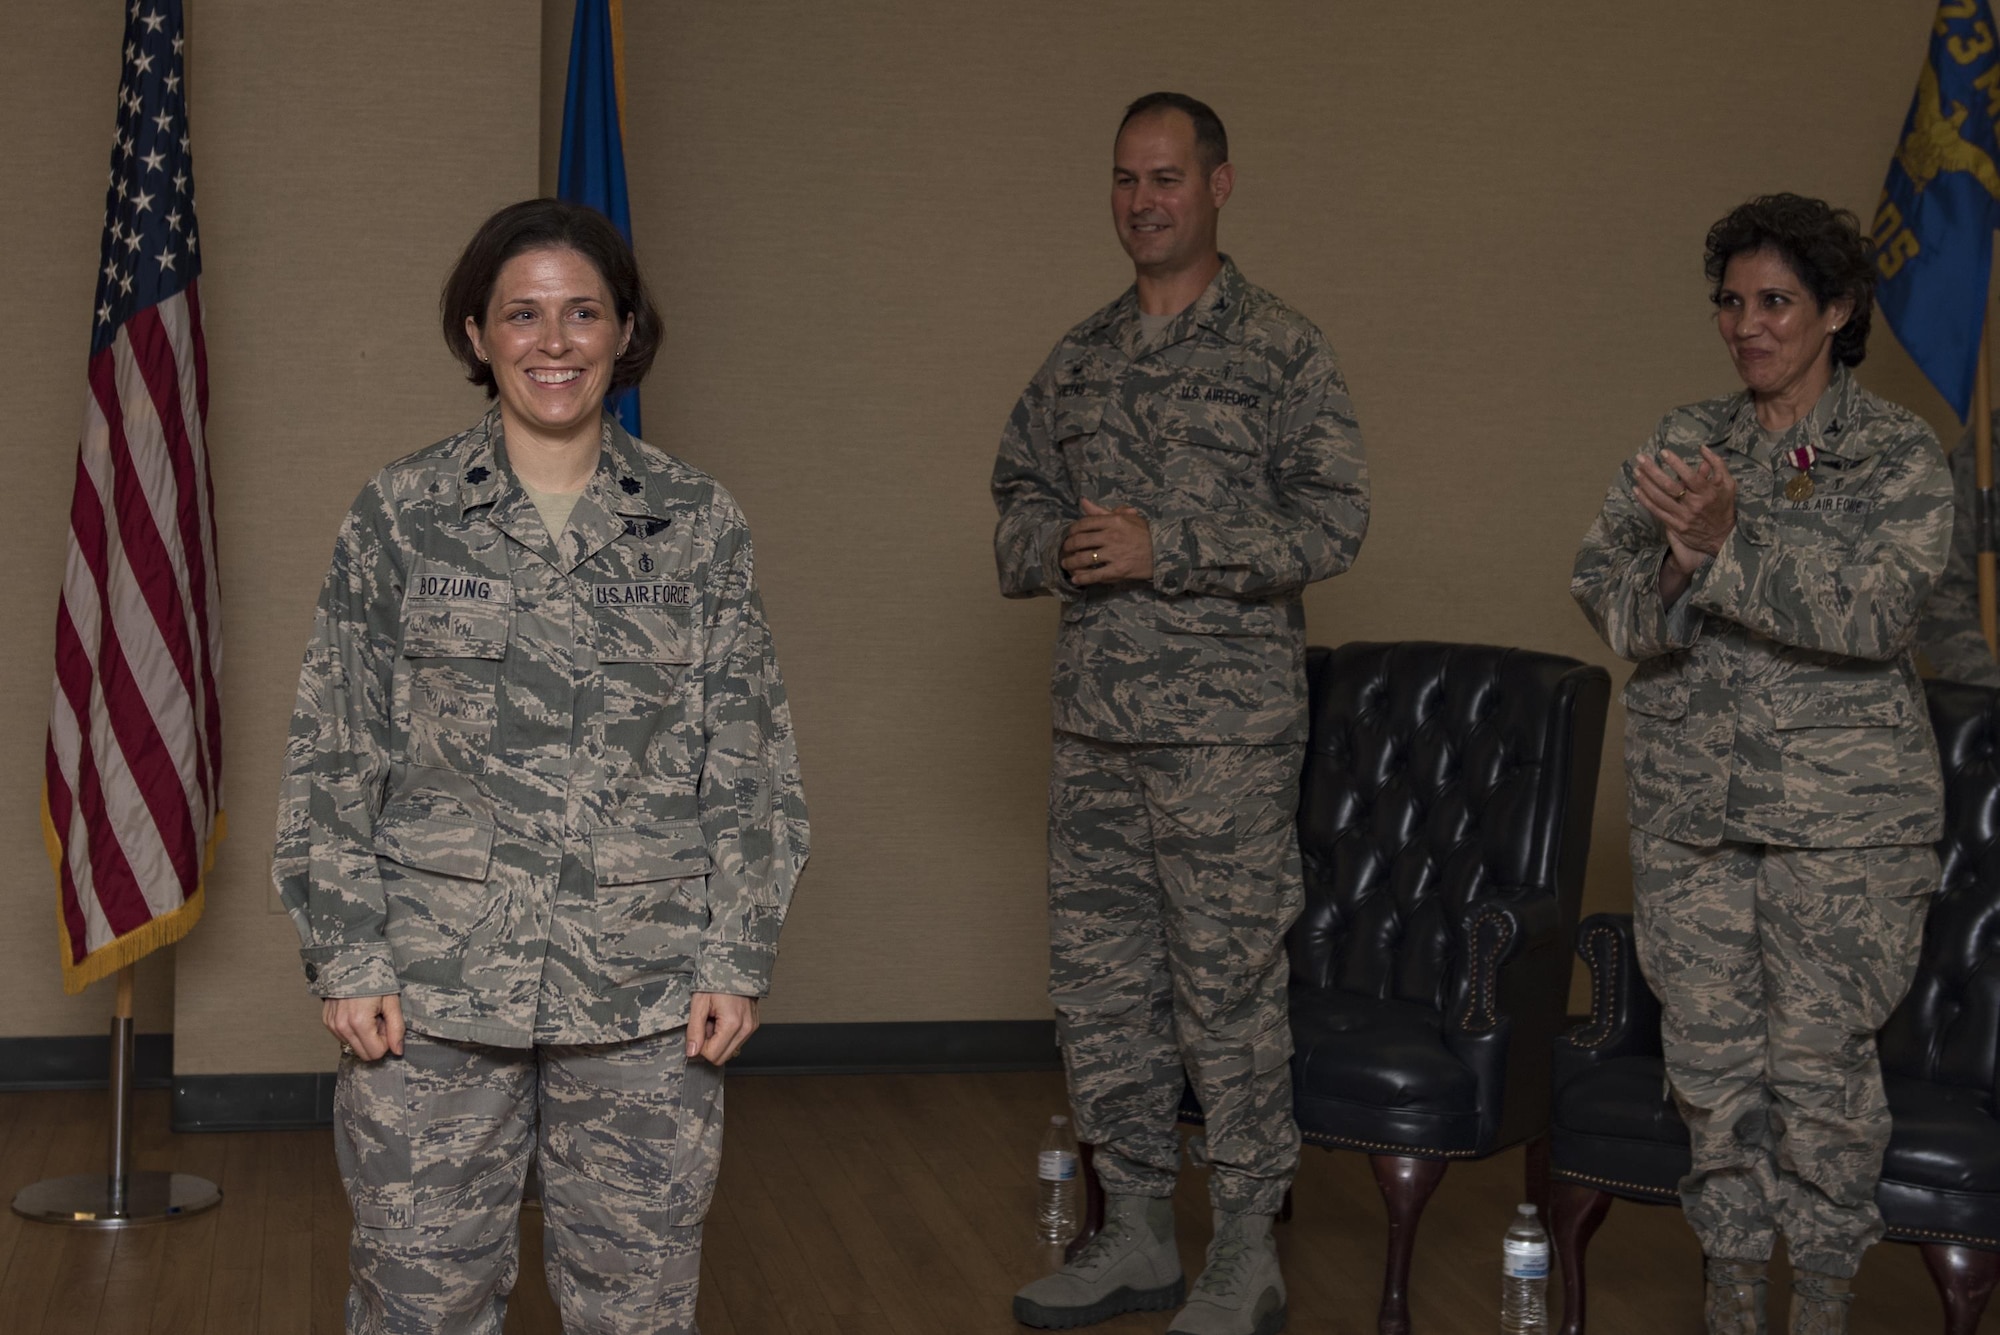 Lt Col. Tracy K. Bozung, incoming 23d Aerospace Medicine Squadron Commander, smiles while receiving an ovation during a change of command ceremony, July 20, 2017, at Moody Air Force Base, Ga. Bozung entered active duty in 2000 after graduating first in her class from the United States Air Force Academy. (U.S. Air Force photo by Airman 1st Class Destiney Masse)
